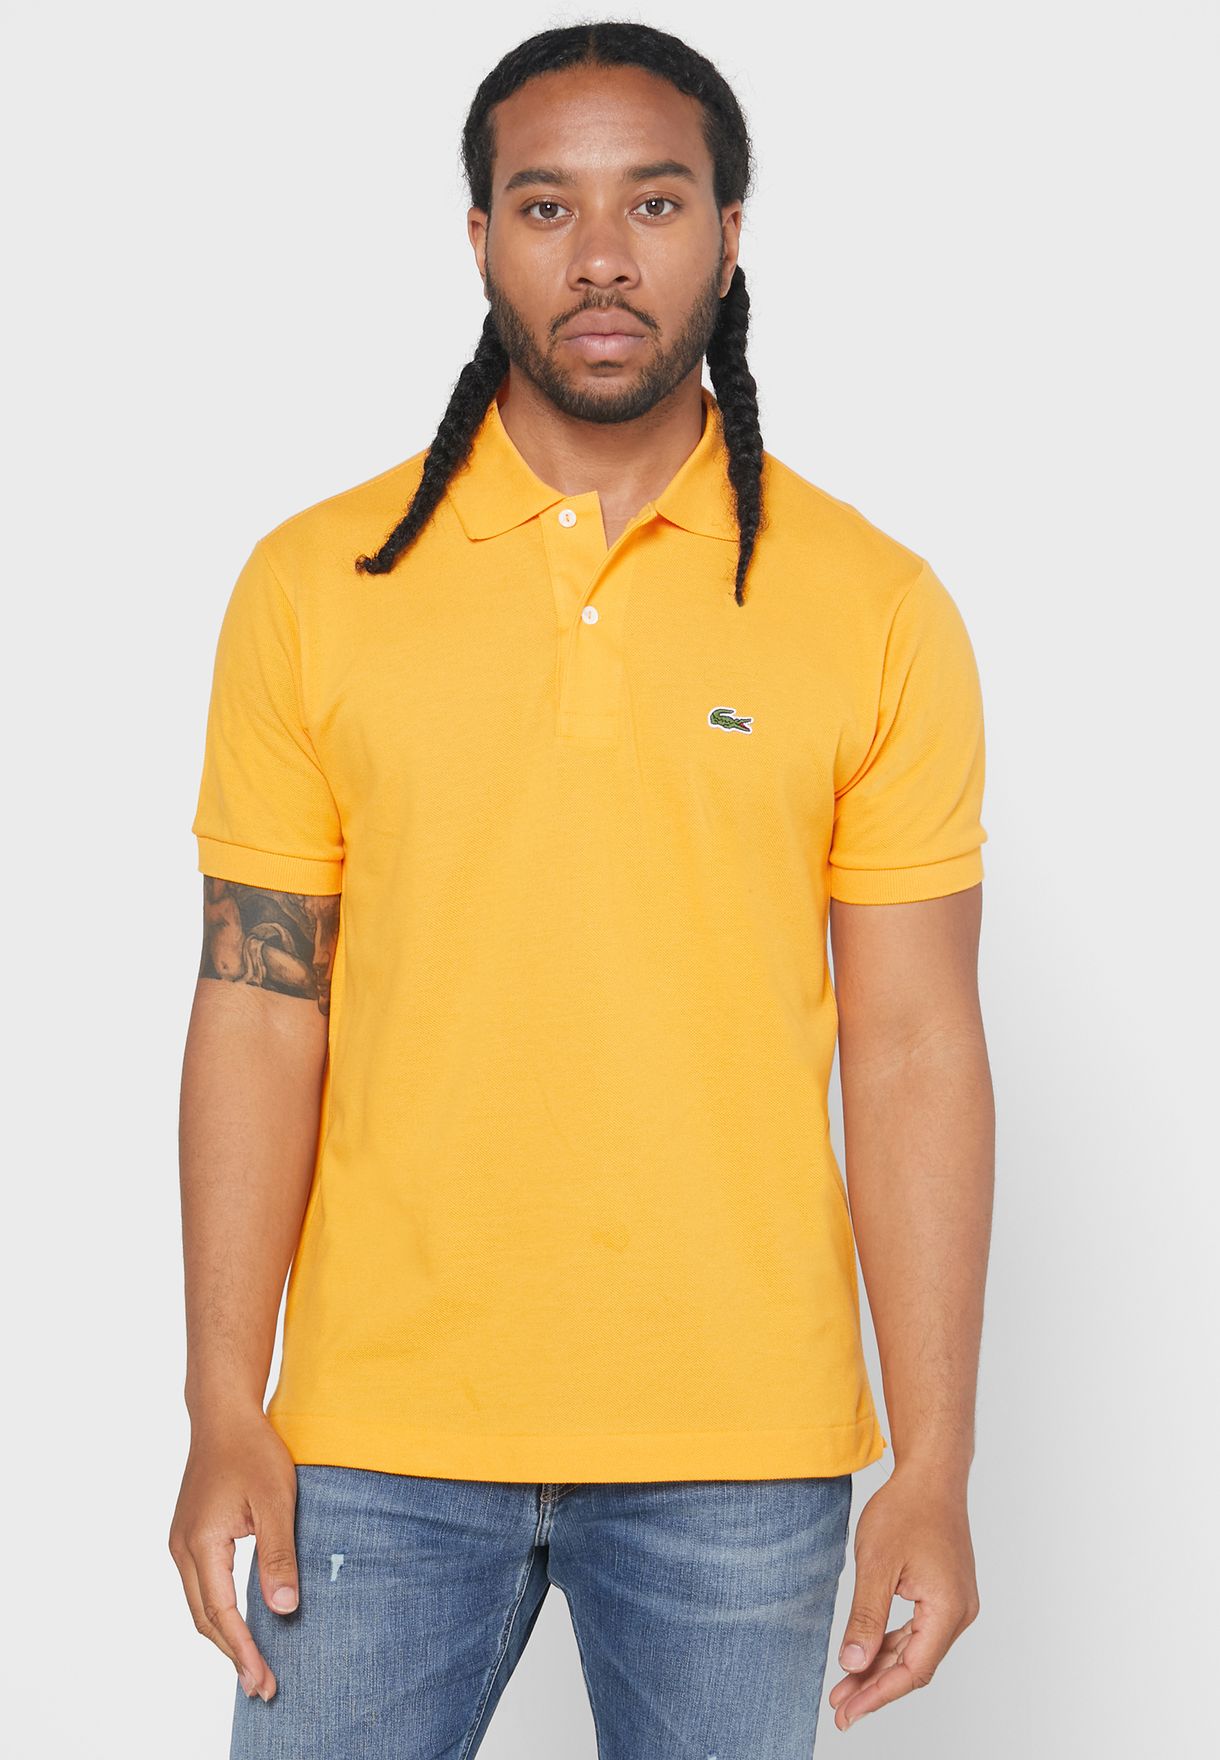 mens yellow lacoste t shirt